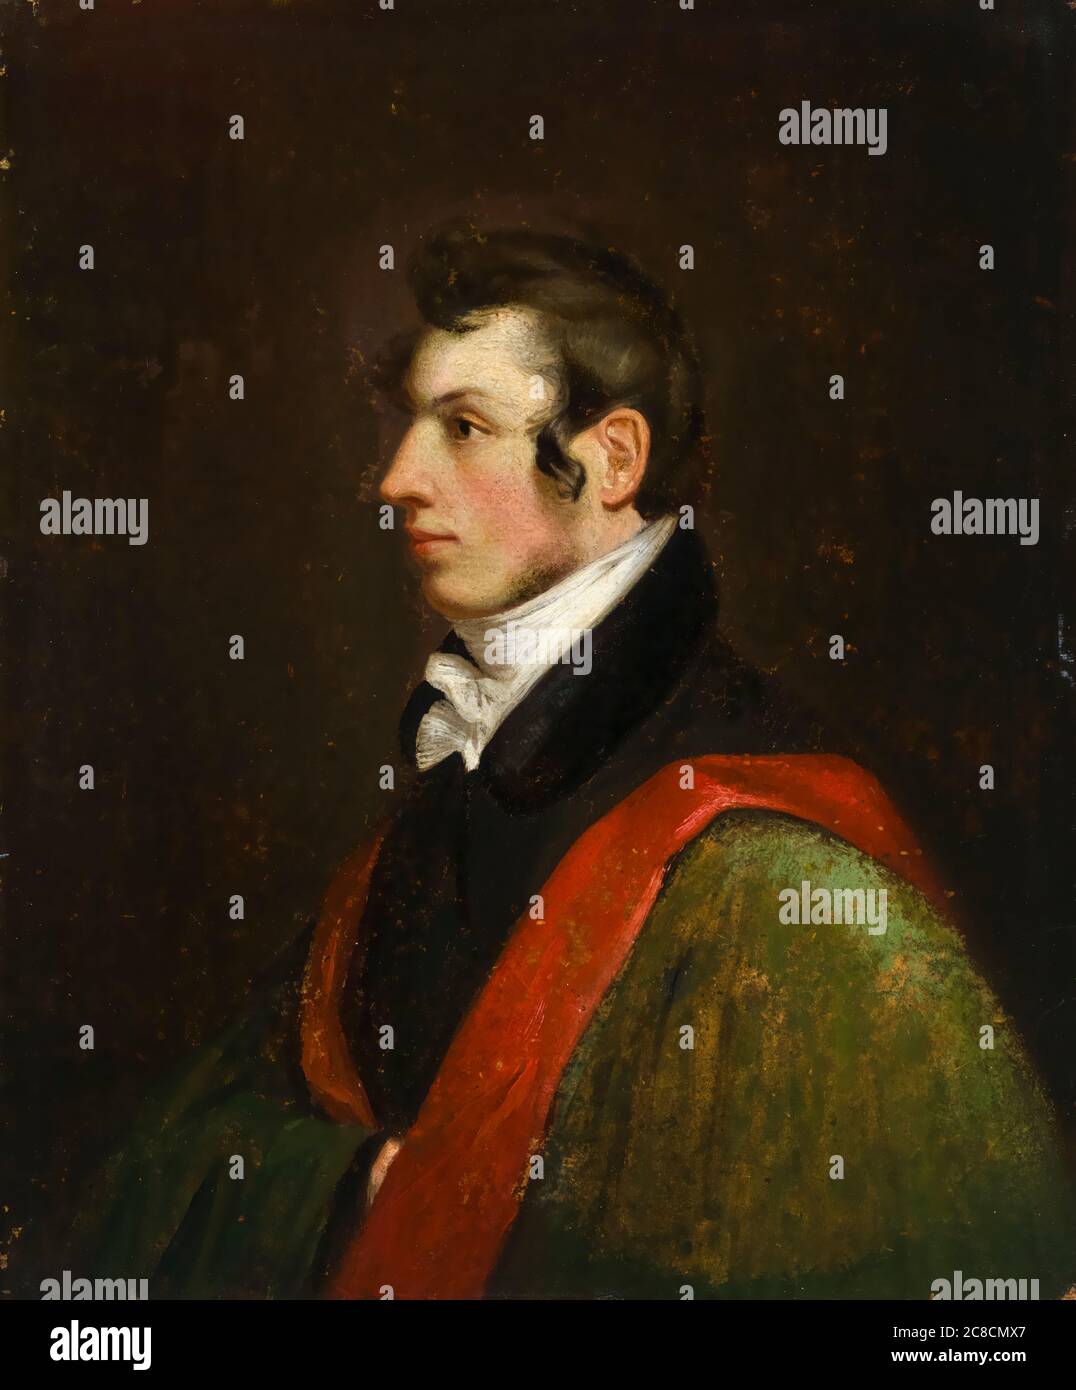 Samuel Finley Breese Morse (1791-1872), Self portrait, American inventor of the single wire telegraph and Morse Code, painting, 1812 Stock Photo